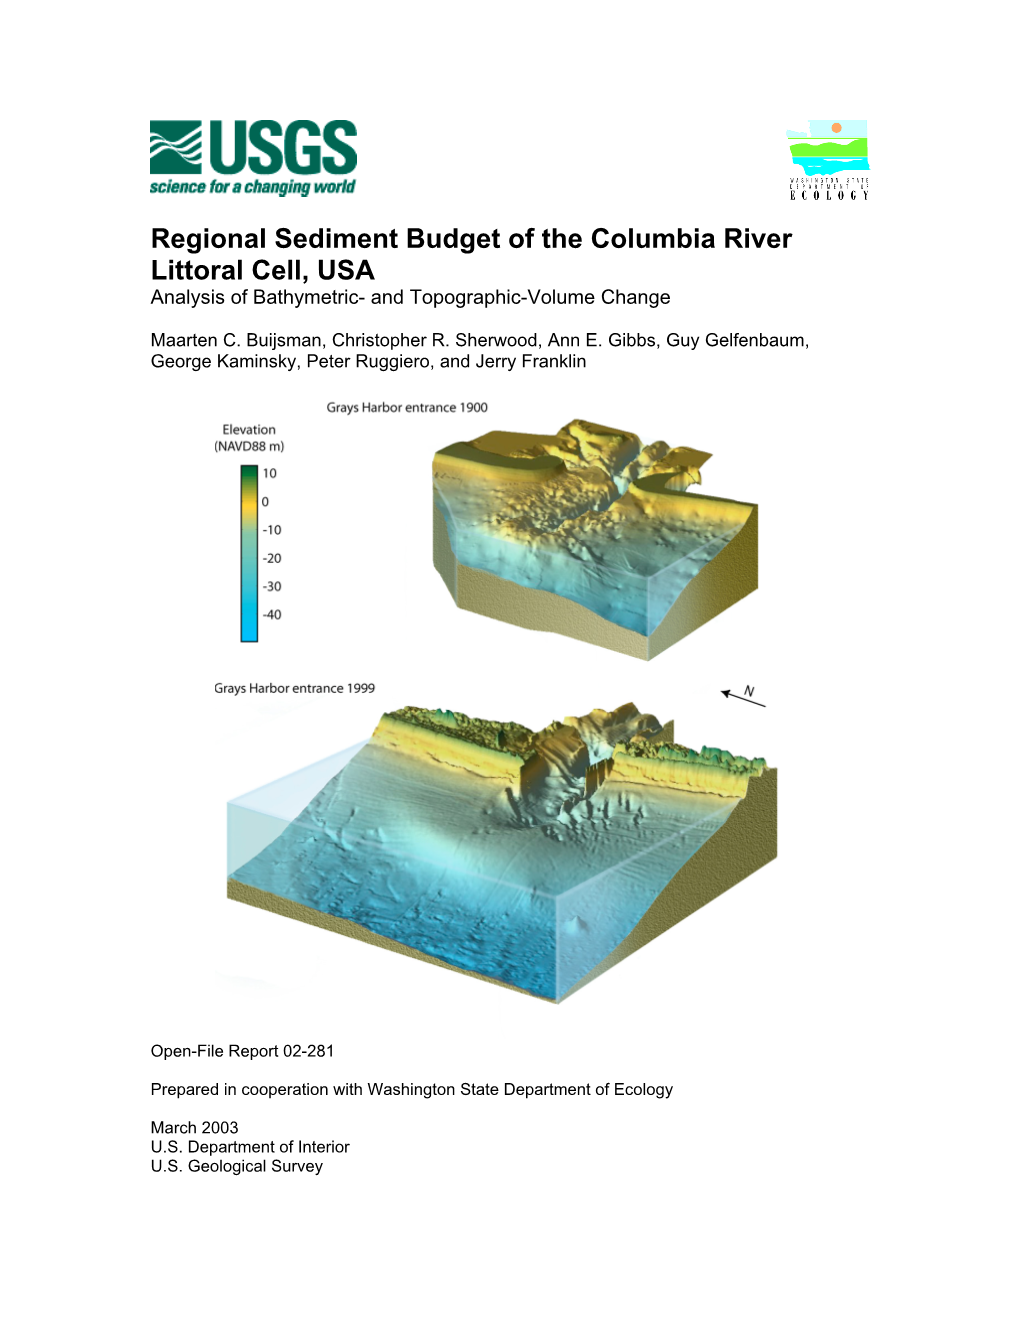 Regional Sediment Budget of the Columbia River Littoral Cell, USA Analysis of Bathymetric- and Topographic-Volume Change